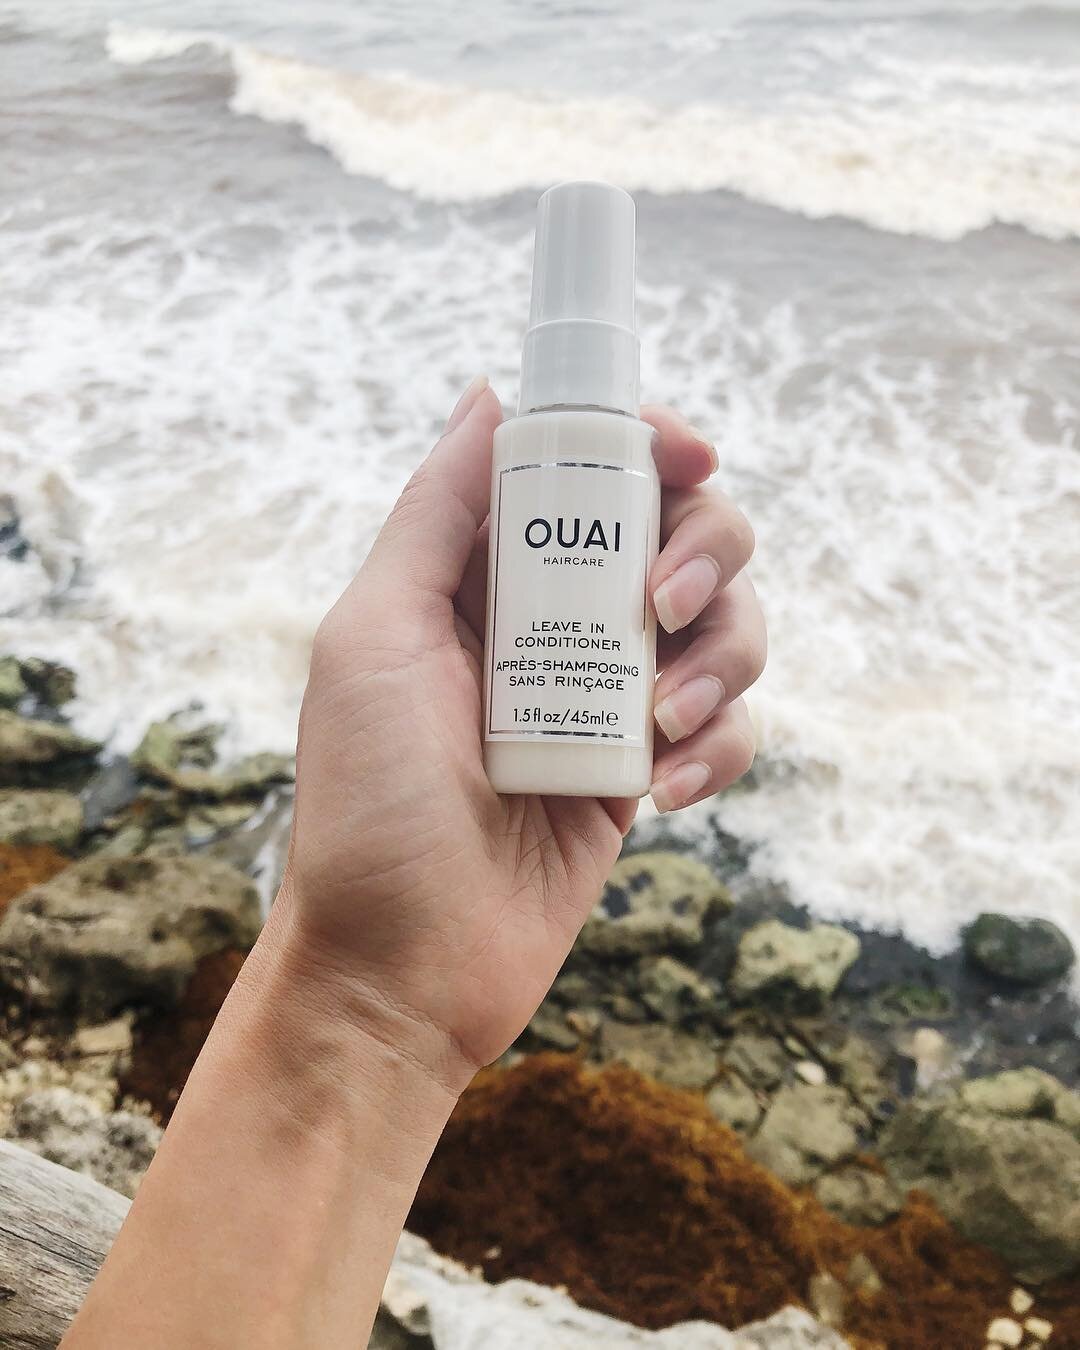 @azuliktulum: I knew my hair was going to be living in sun, sweat and beach with not a care in the world! But with all that fun, it&rsquo;s gonna get super tangled. This leave-in conditioner by @theouai was SO awesome. Now I need a de-tangler for my 